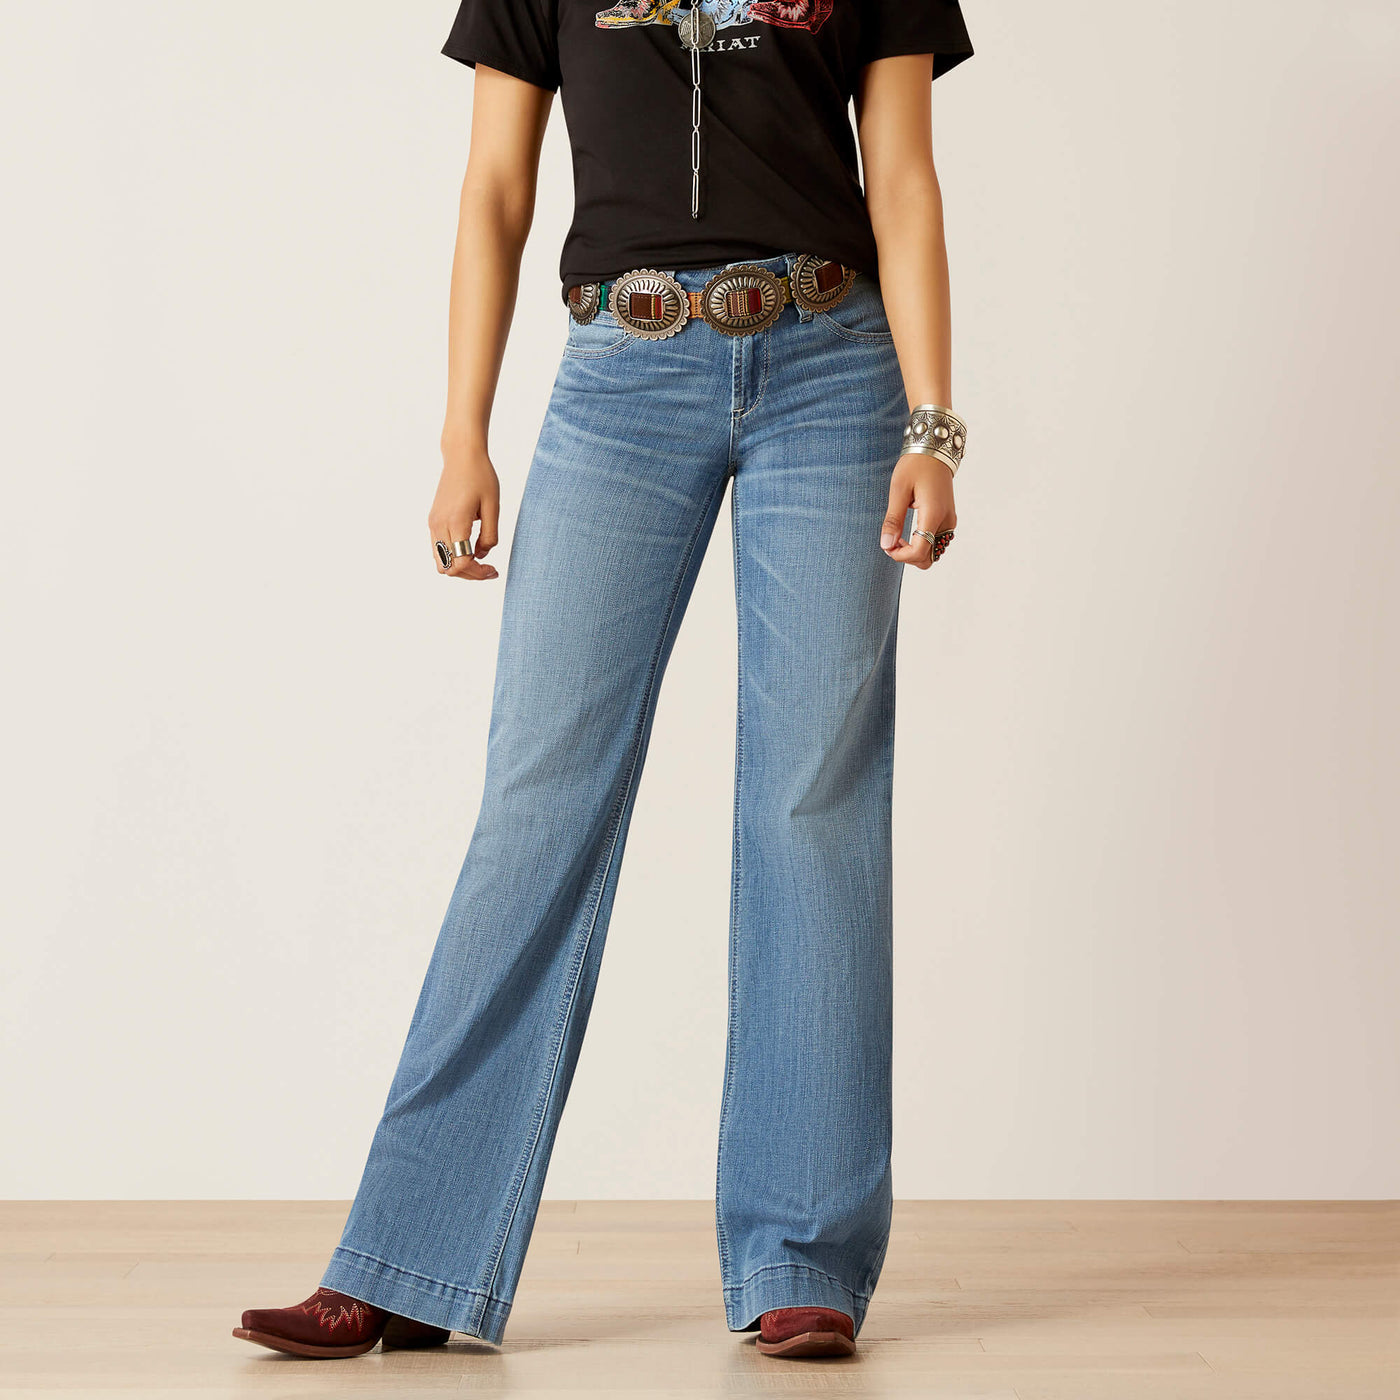 Ariat Ultra High Rise Frankie Jeans- Women's Retro Jeans